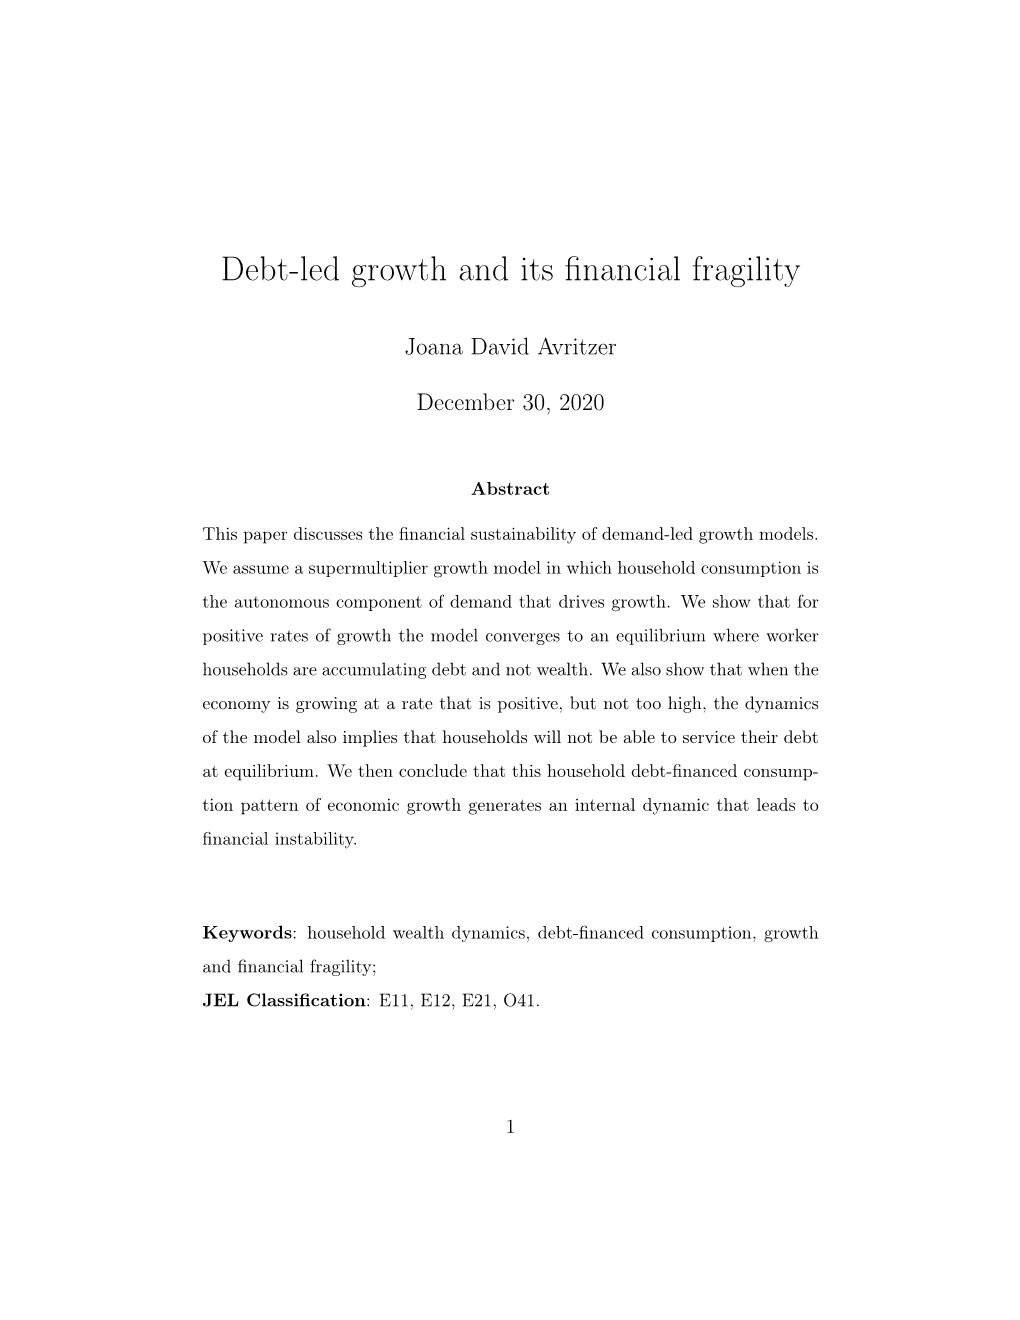 Debt-Led Growth and Its Financial Fragility